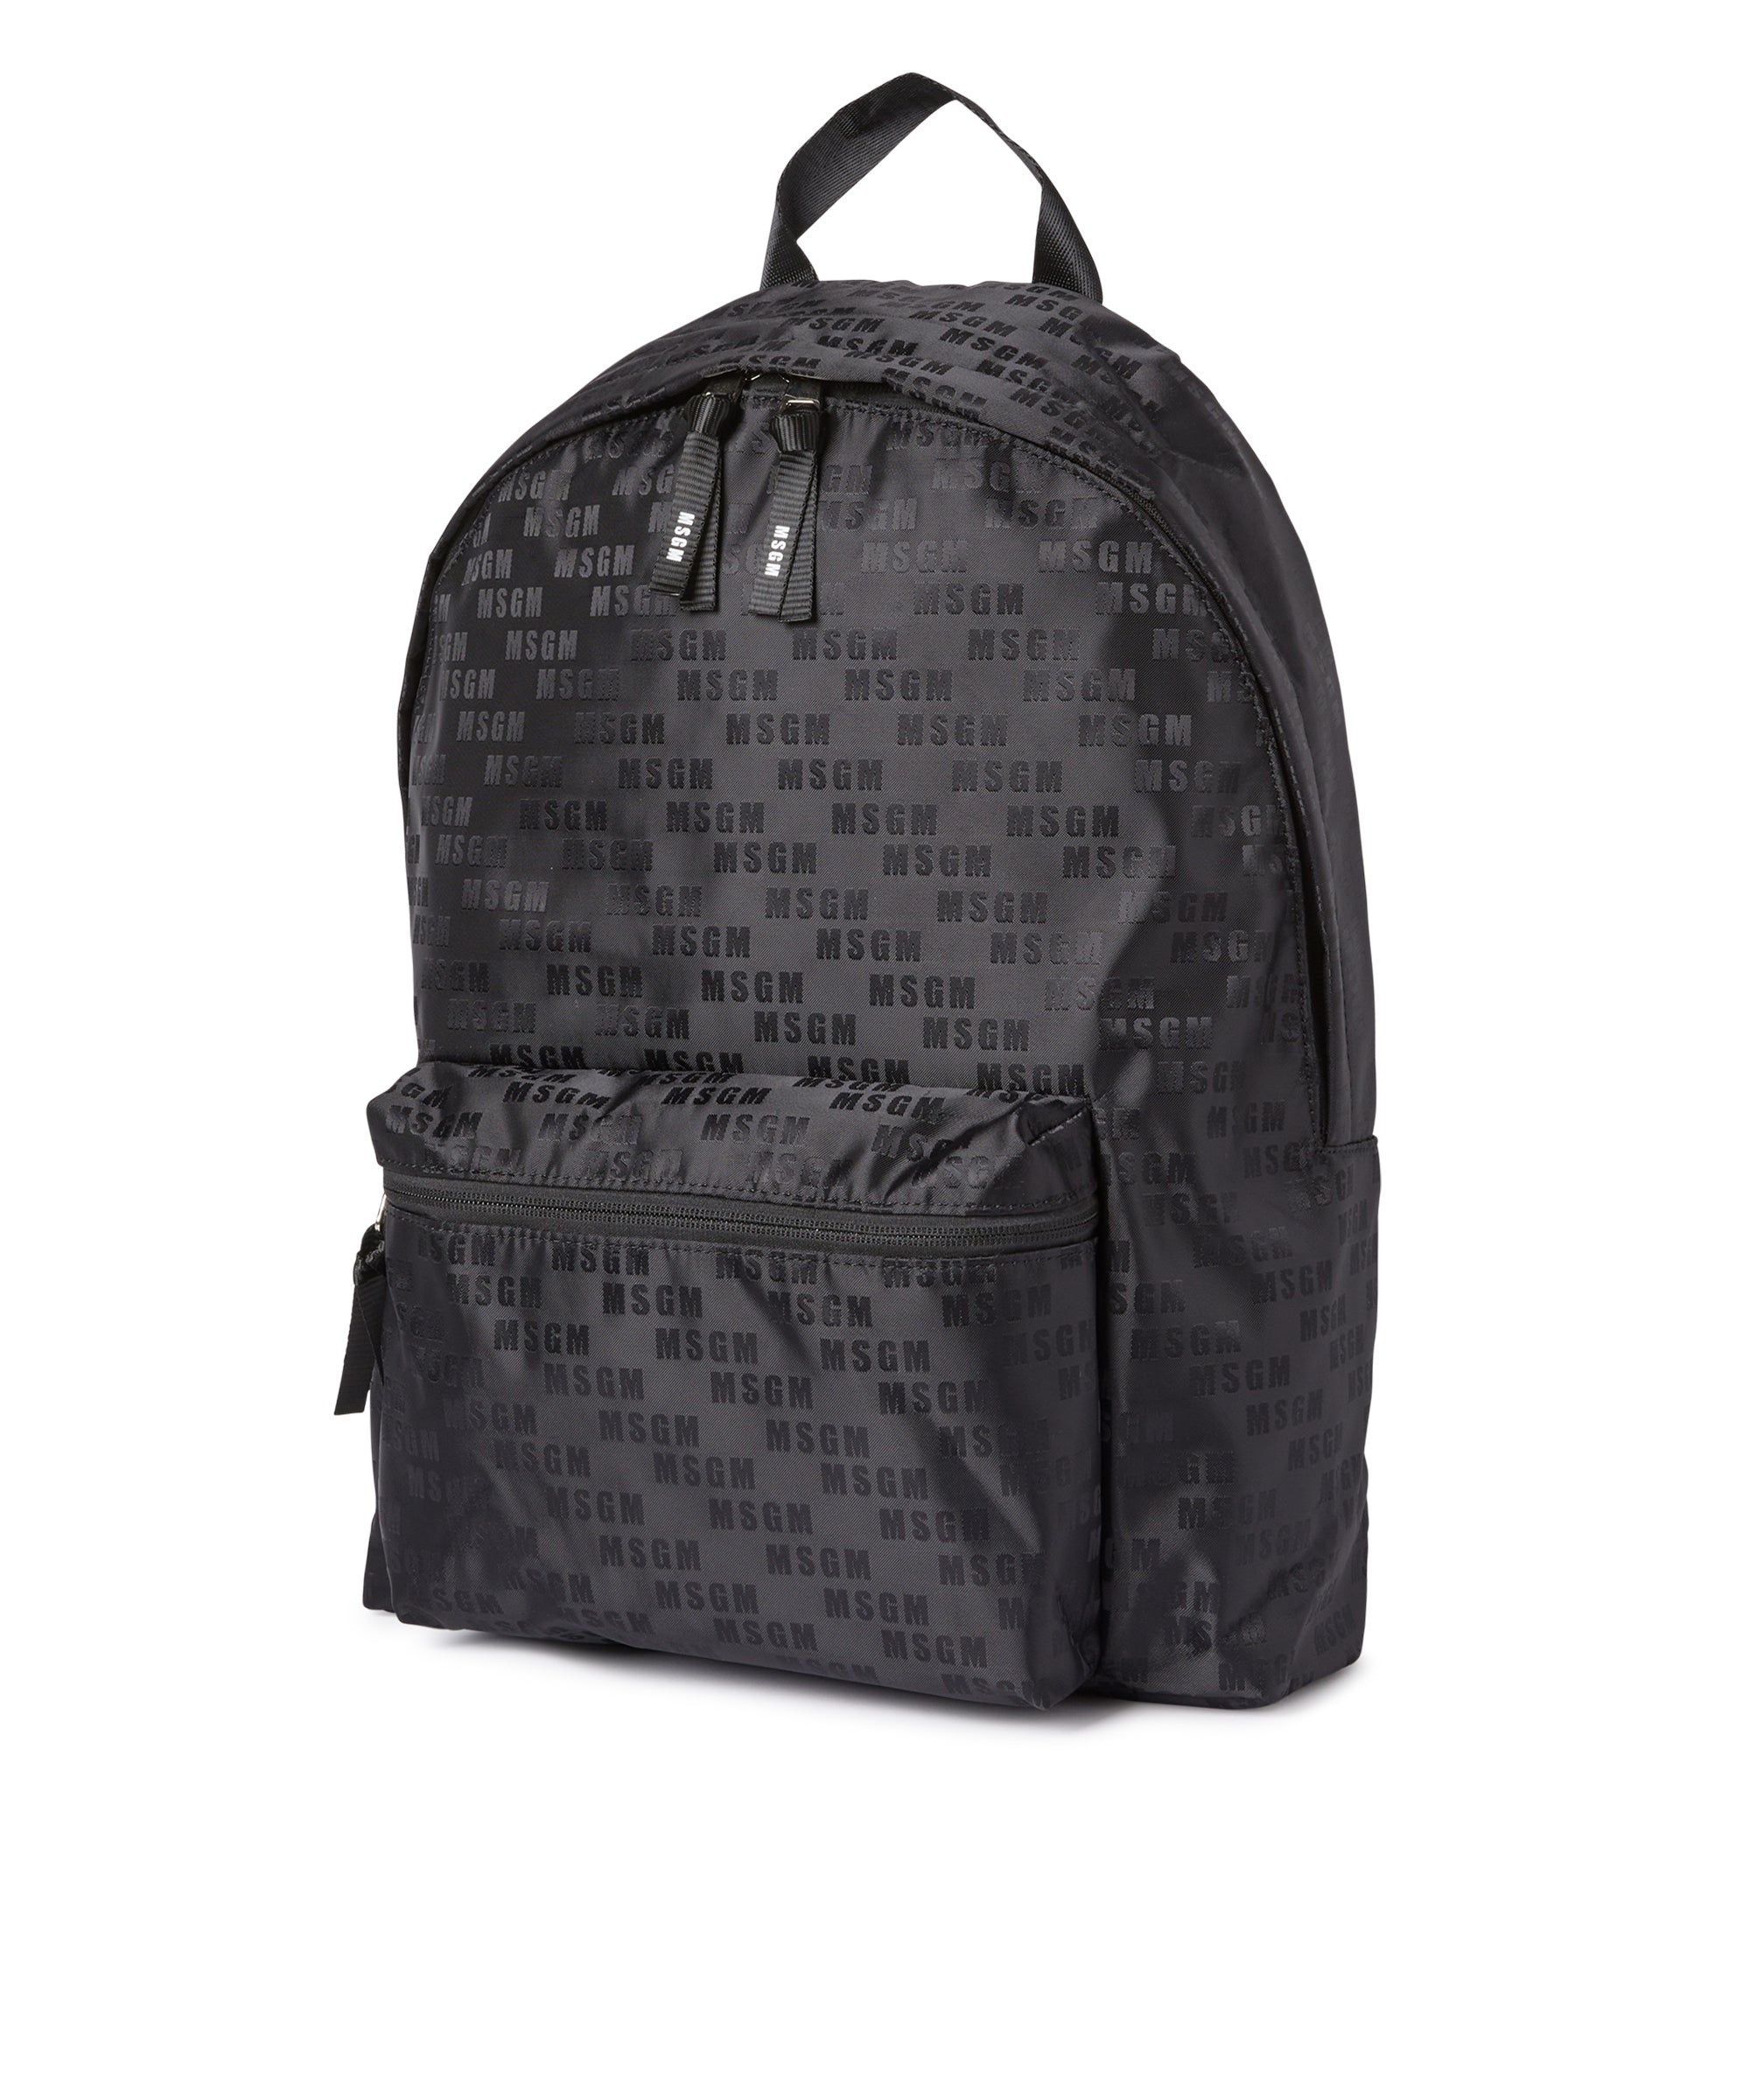 "Signature Iconic Nylon" backpack with all-over print - 3